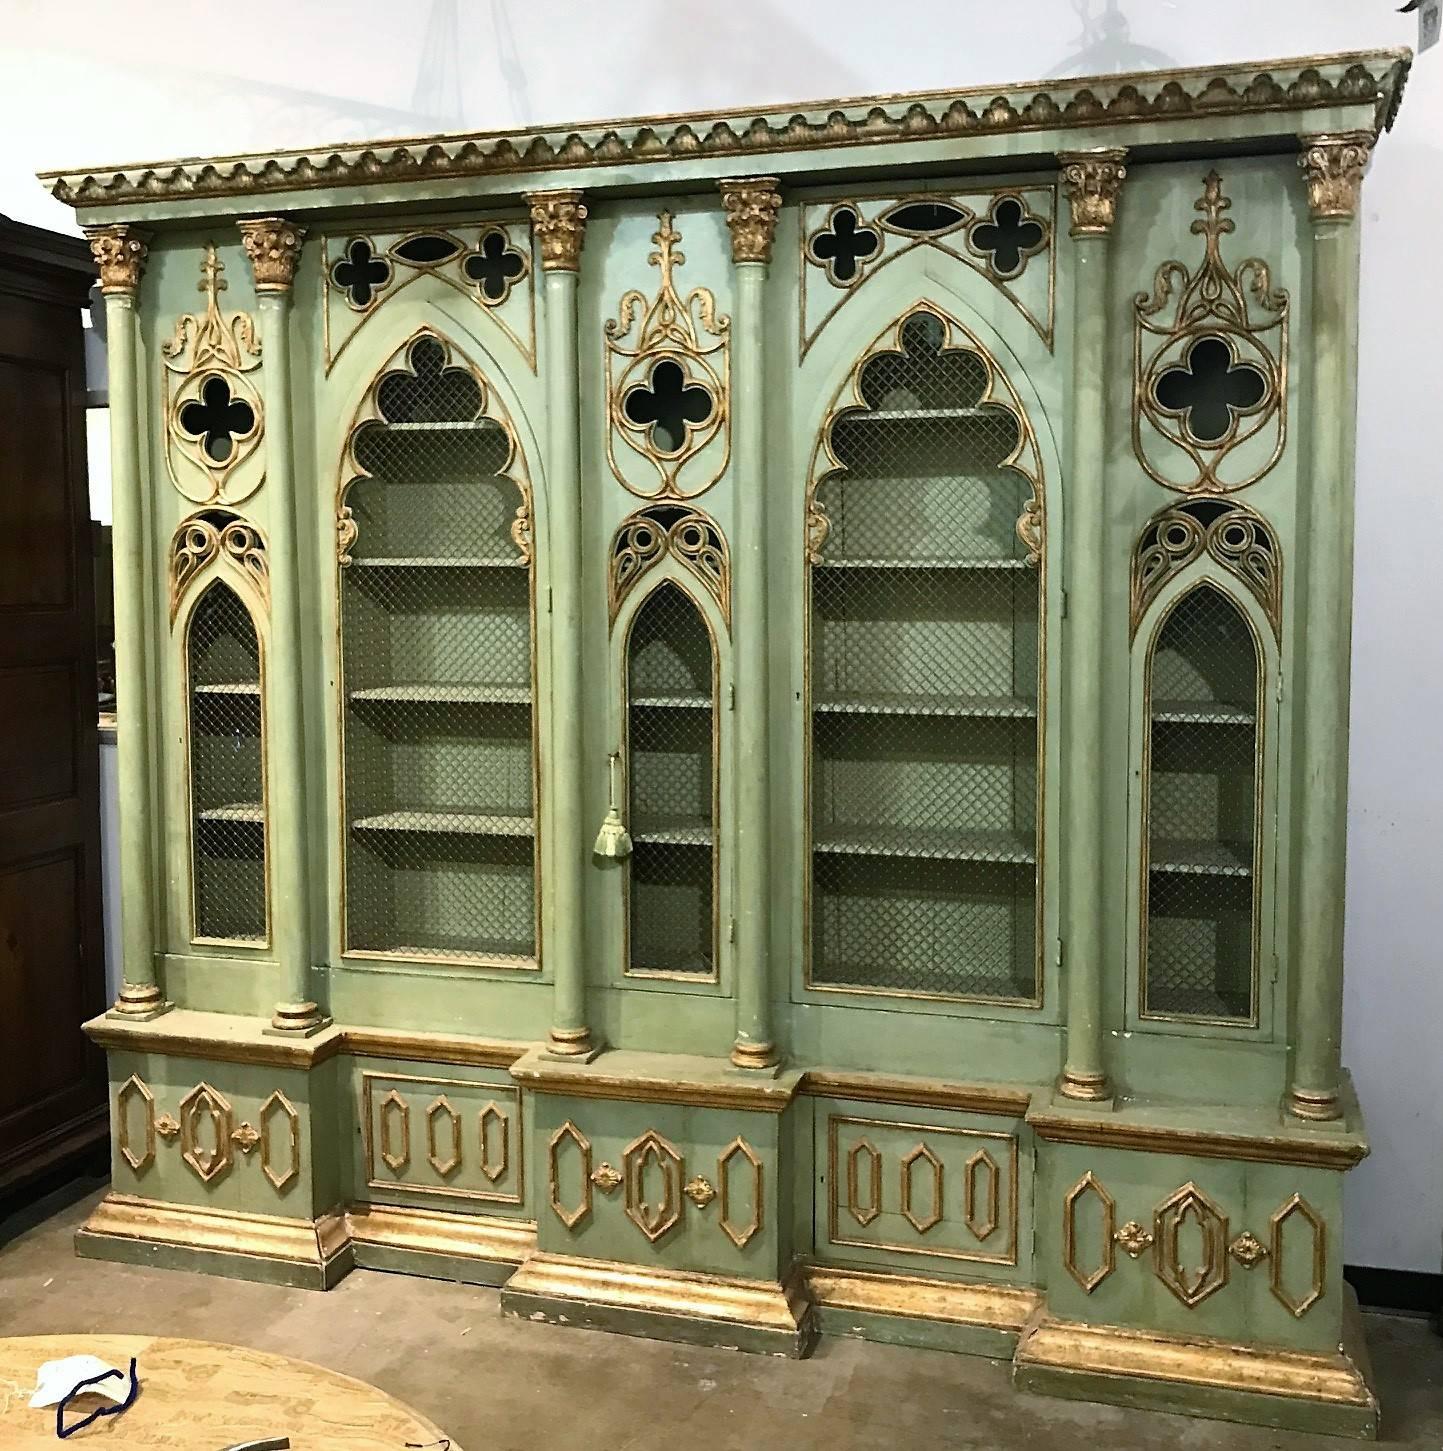 Particularly Fine late 19th century Italian Gothic Revival breakfront cabinet bookcase with parcel-gilt accents. The molded out-swept leaf carved cornice above Gothic arched shaped grilled doors with trefoil carvings divided and flanked by pilasters